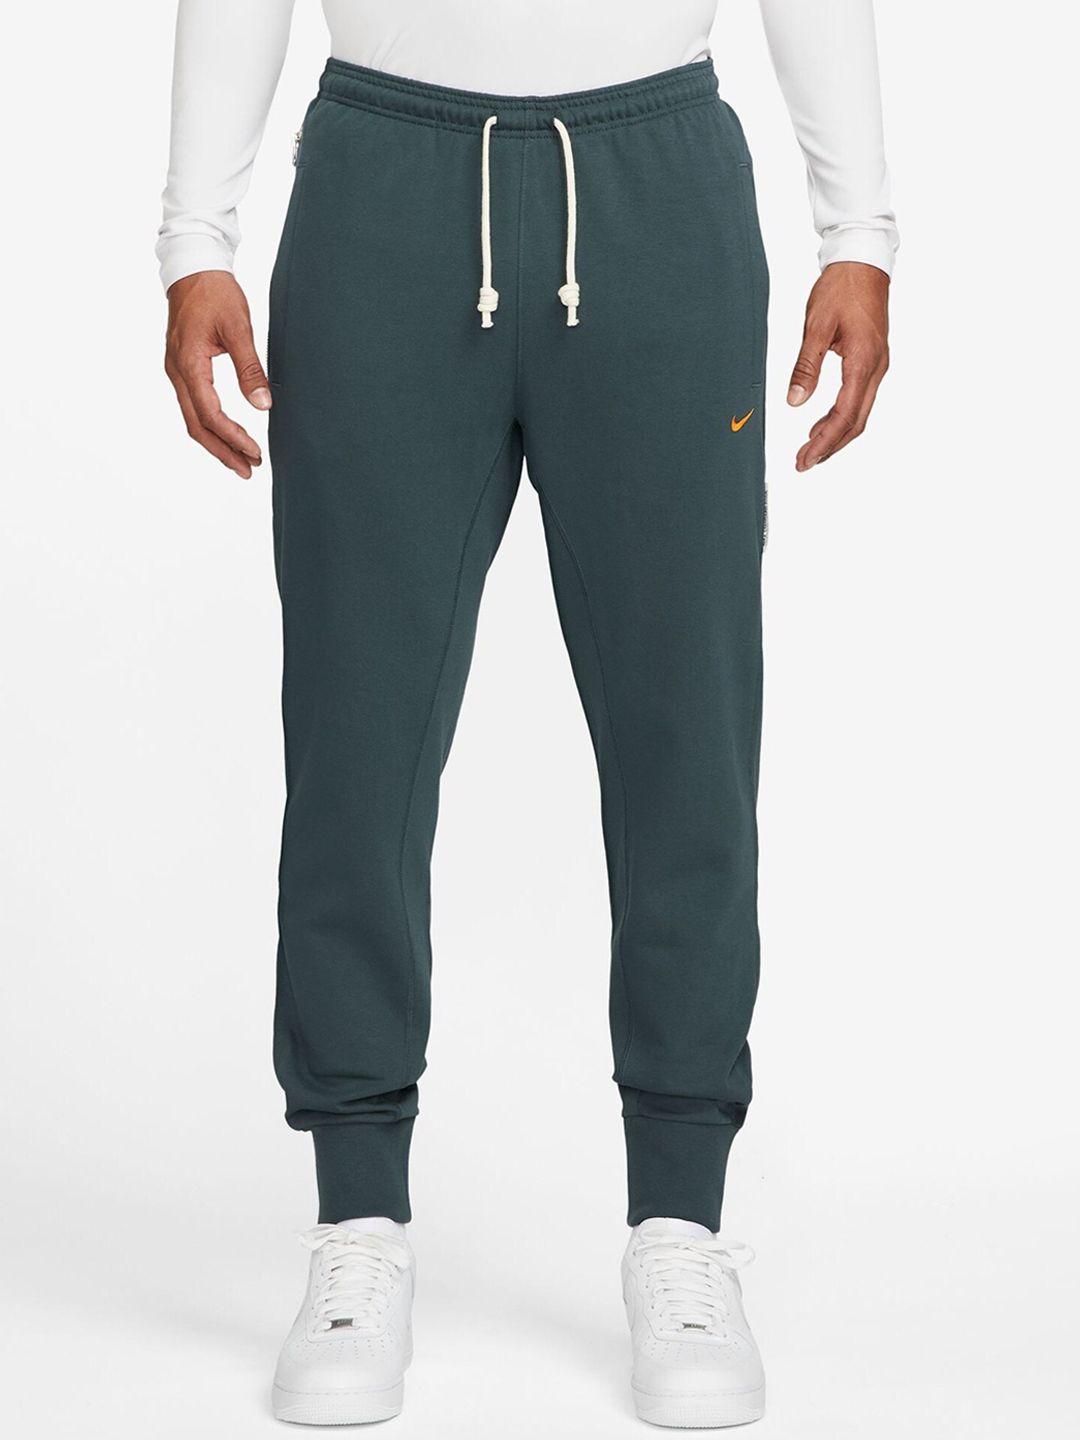 nike-dry-fit-football-track-pants